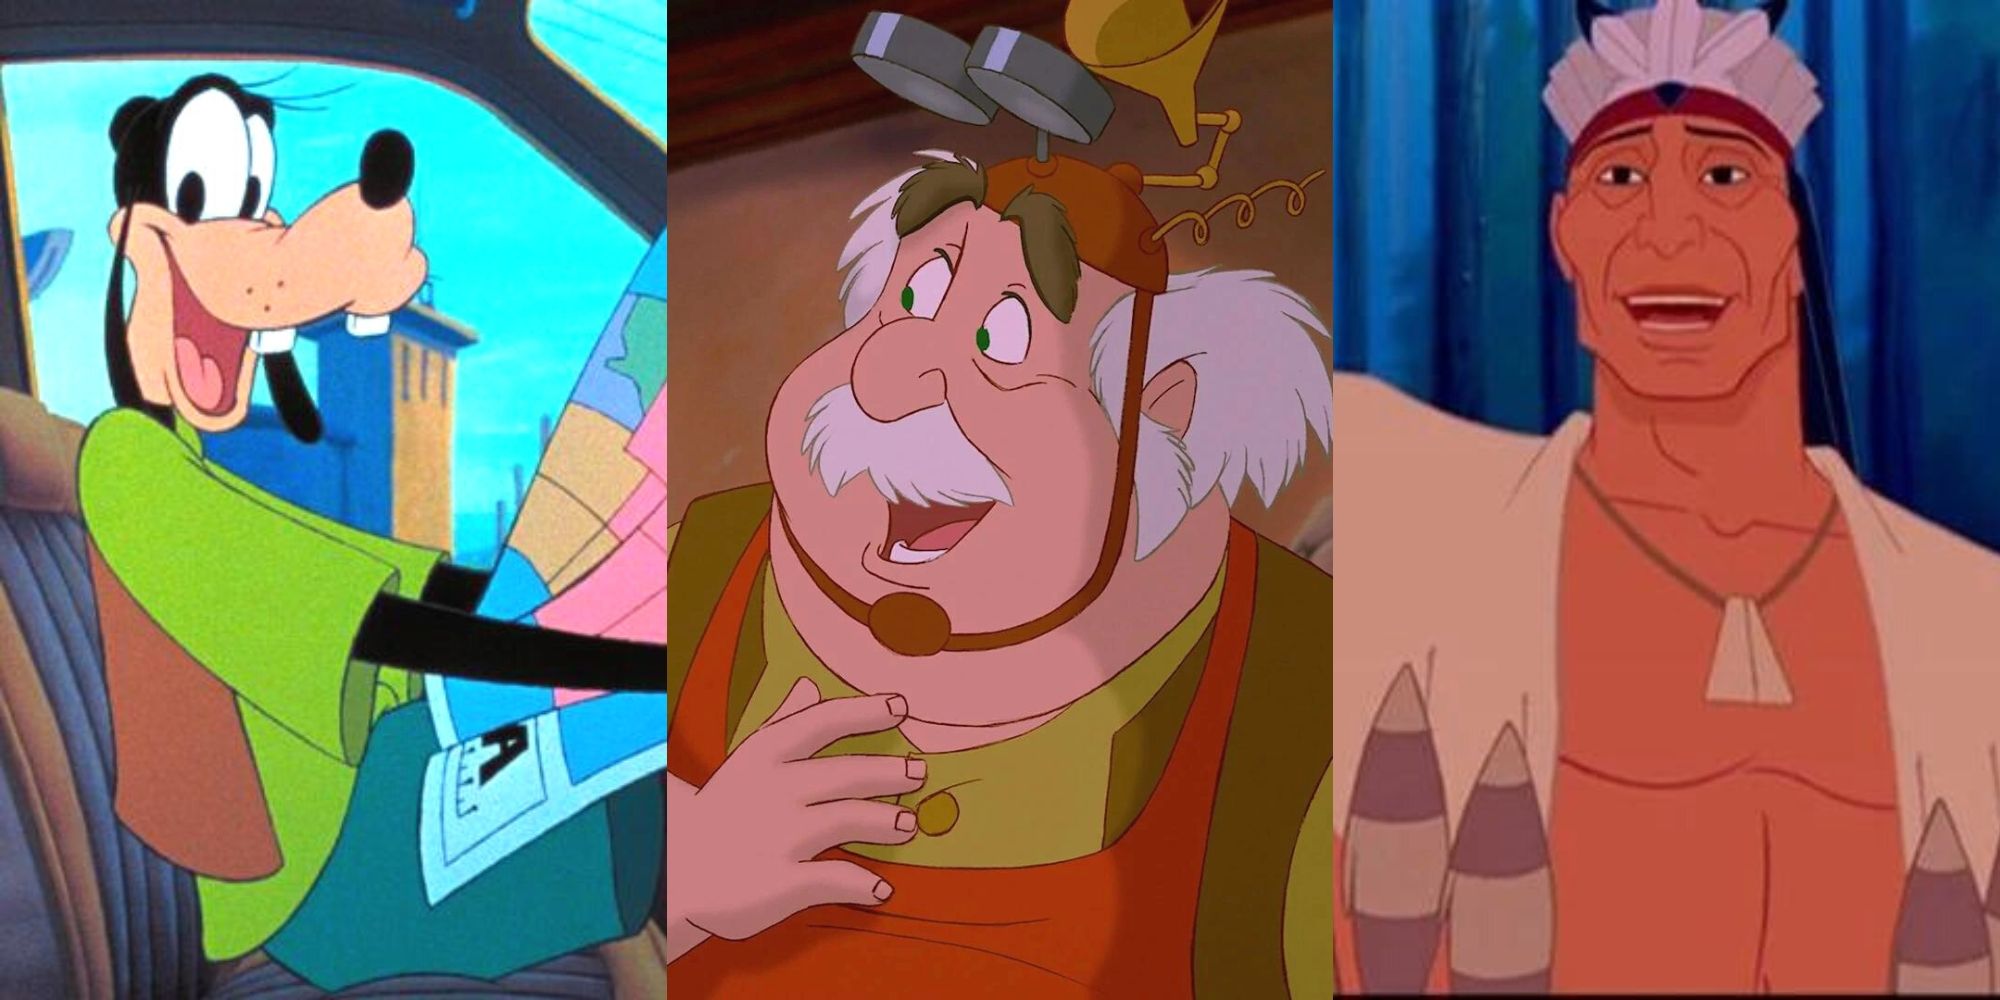 Goofy in A Goofy Movie, Maurice in Beauty and the Beast, Chief Powhatan in Pocahontas